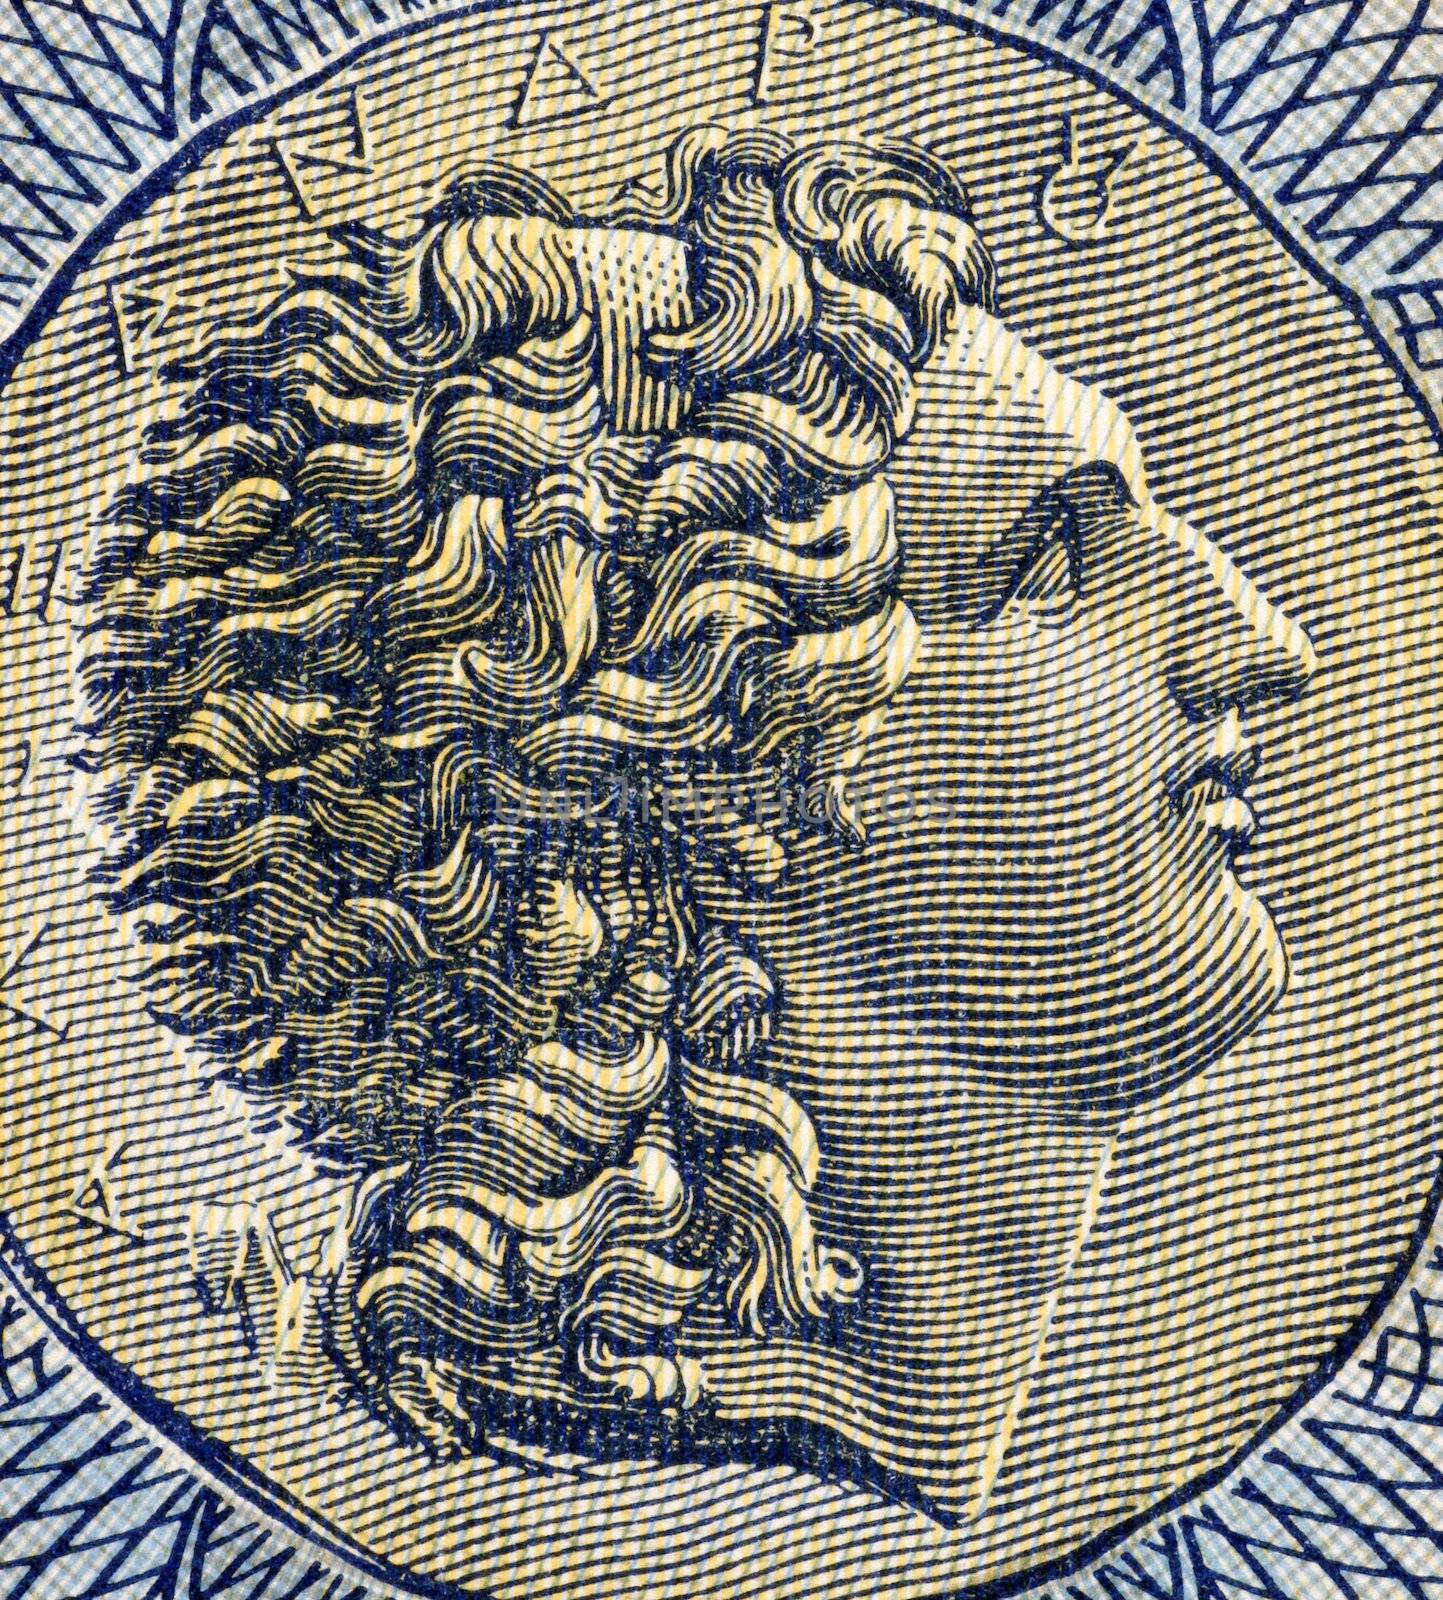 Alexander The Great (356-323BC) on 1000 Drachmai 1941 Banknote from Greece. King of Macedon, a state in northern ancient Greece and creator of one of the  largest empires of the ancient world while undefeated in battle. 